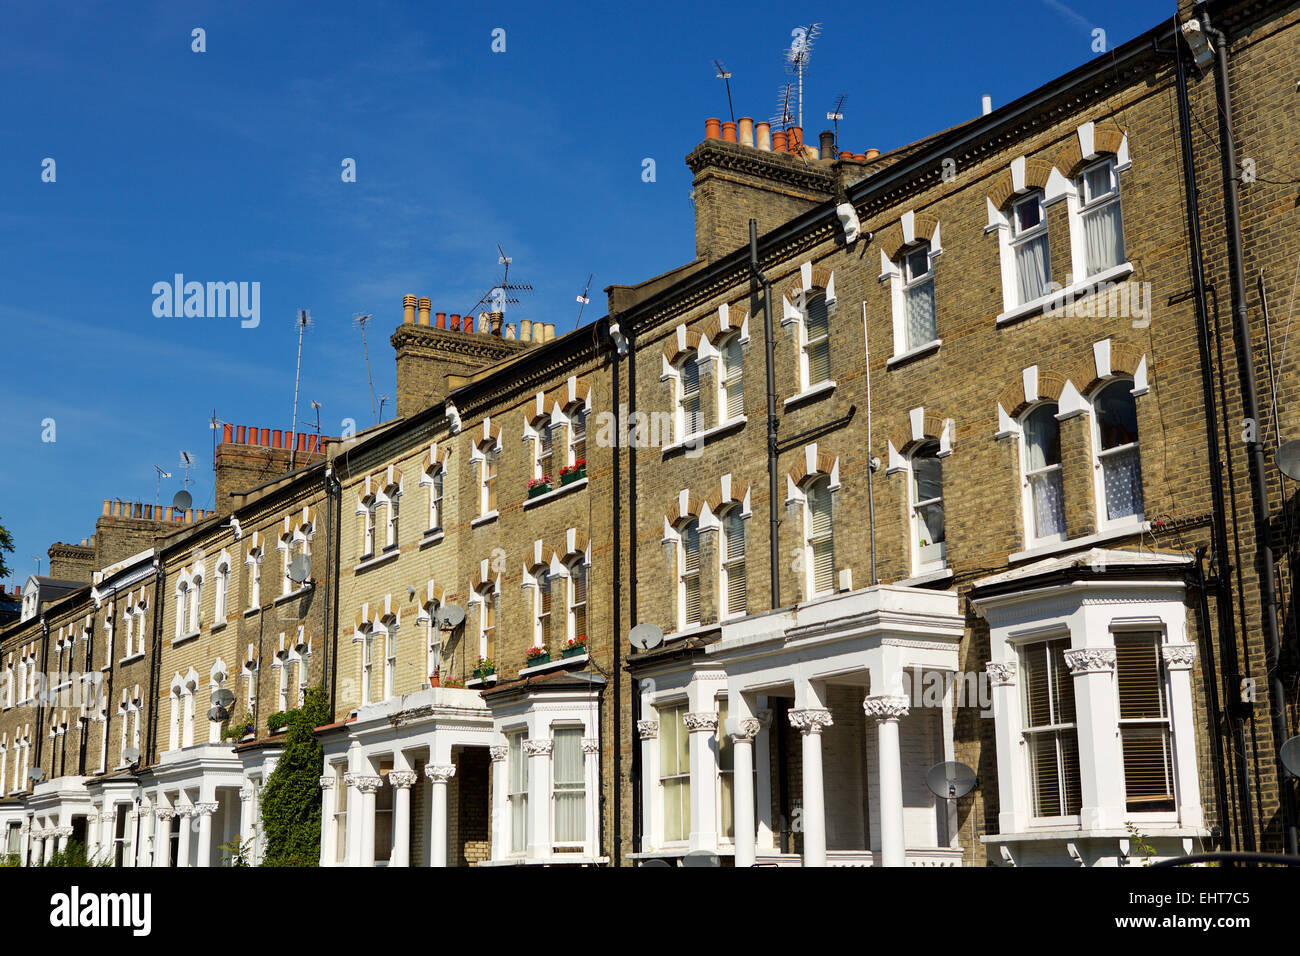 Typical quiet suburban residential street with Victorian Terraced houses in the capital. Shot runs top right to bottom left. Stock Photo